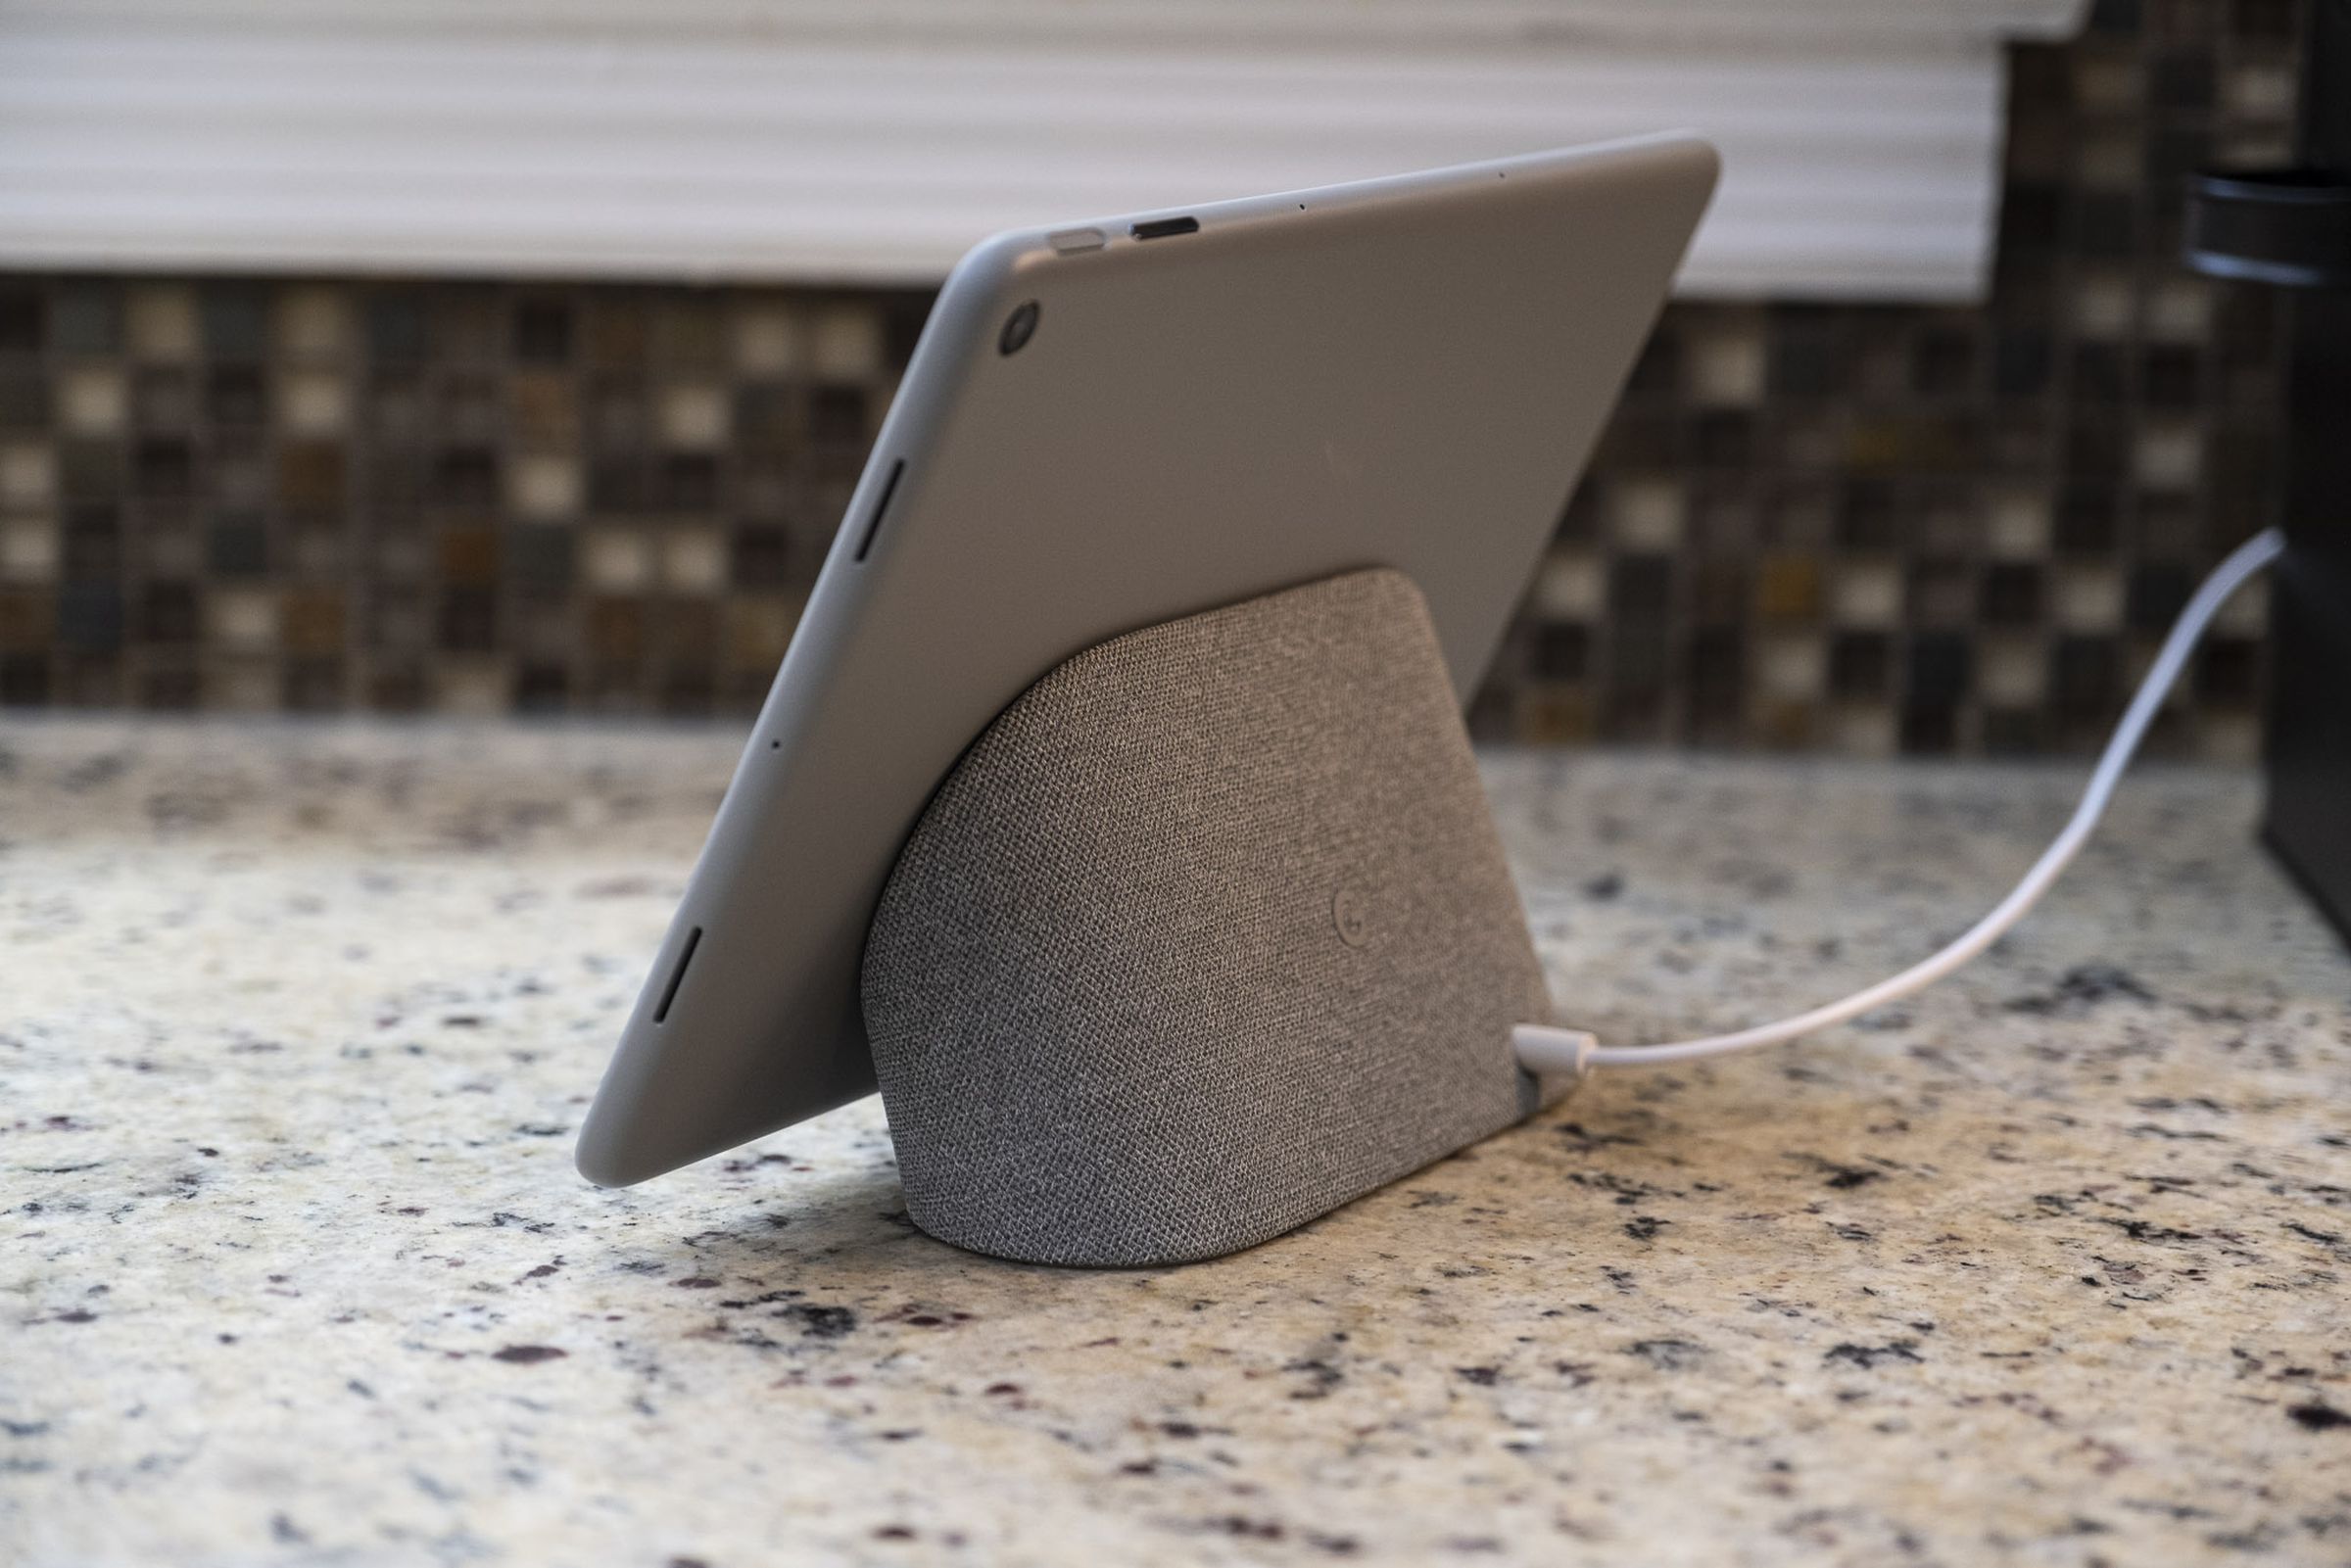 A back view of the Pixel Tablet on its speaker dock.